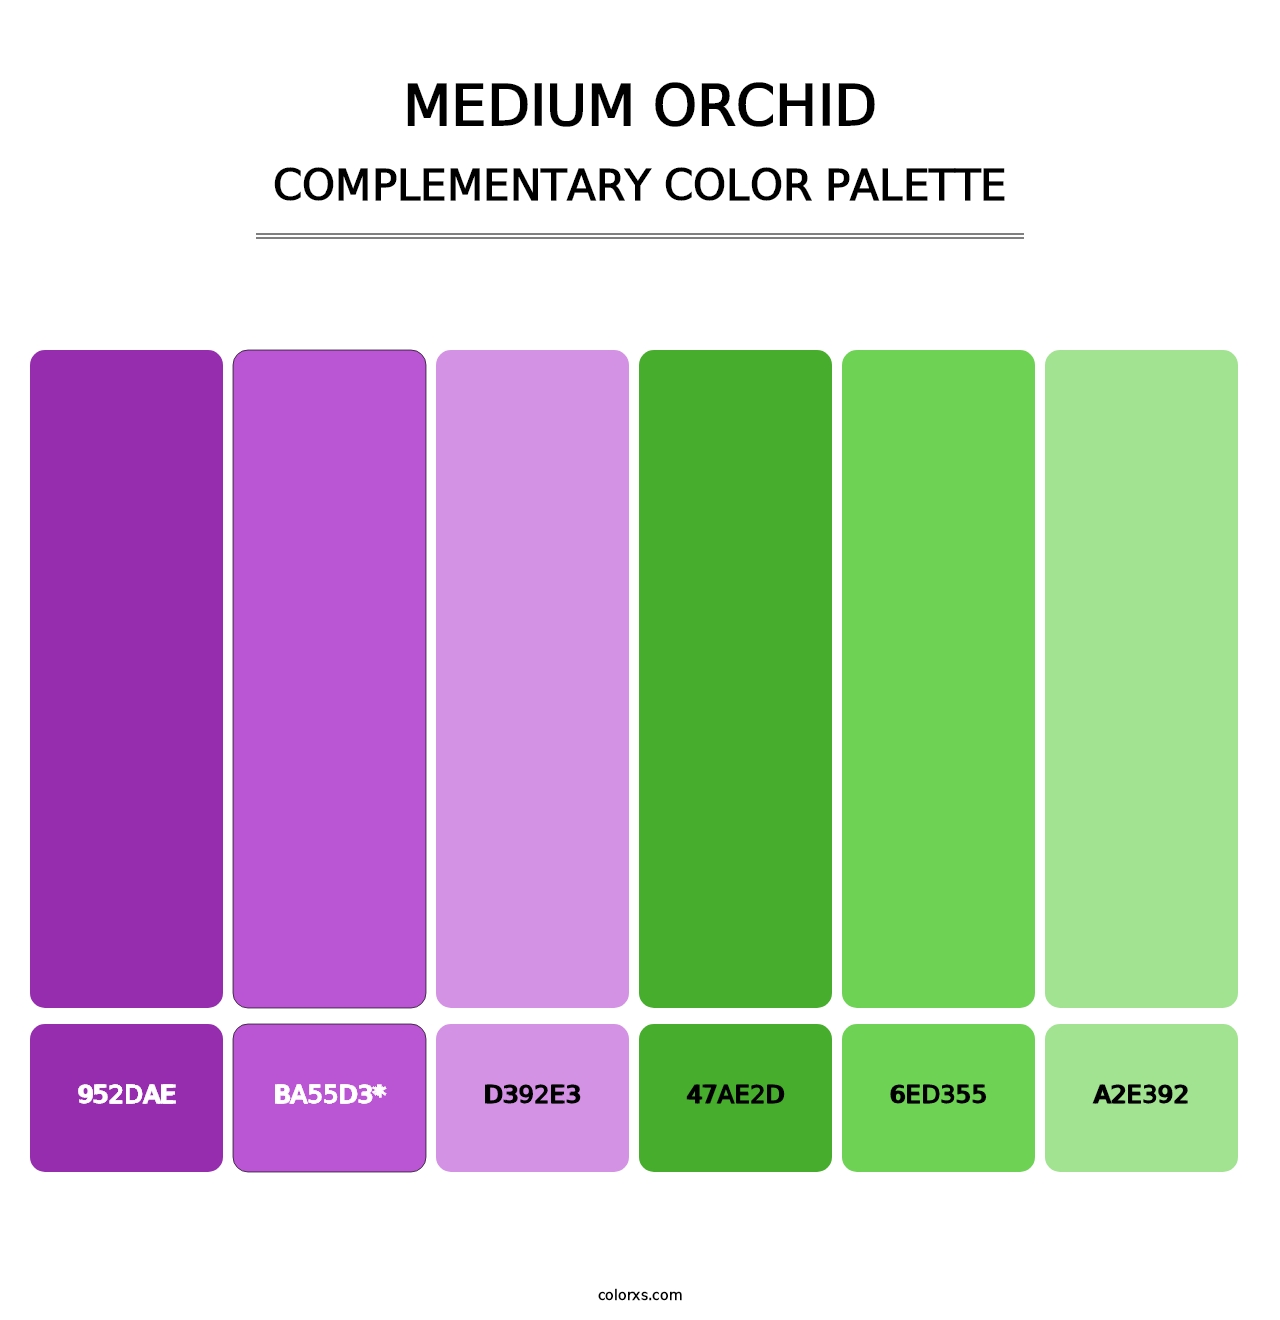 Medium Orchid - Complementary Color Palette